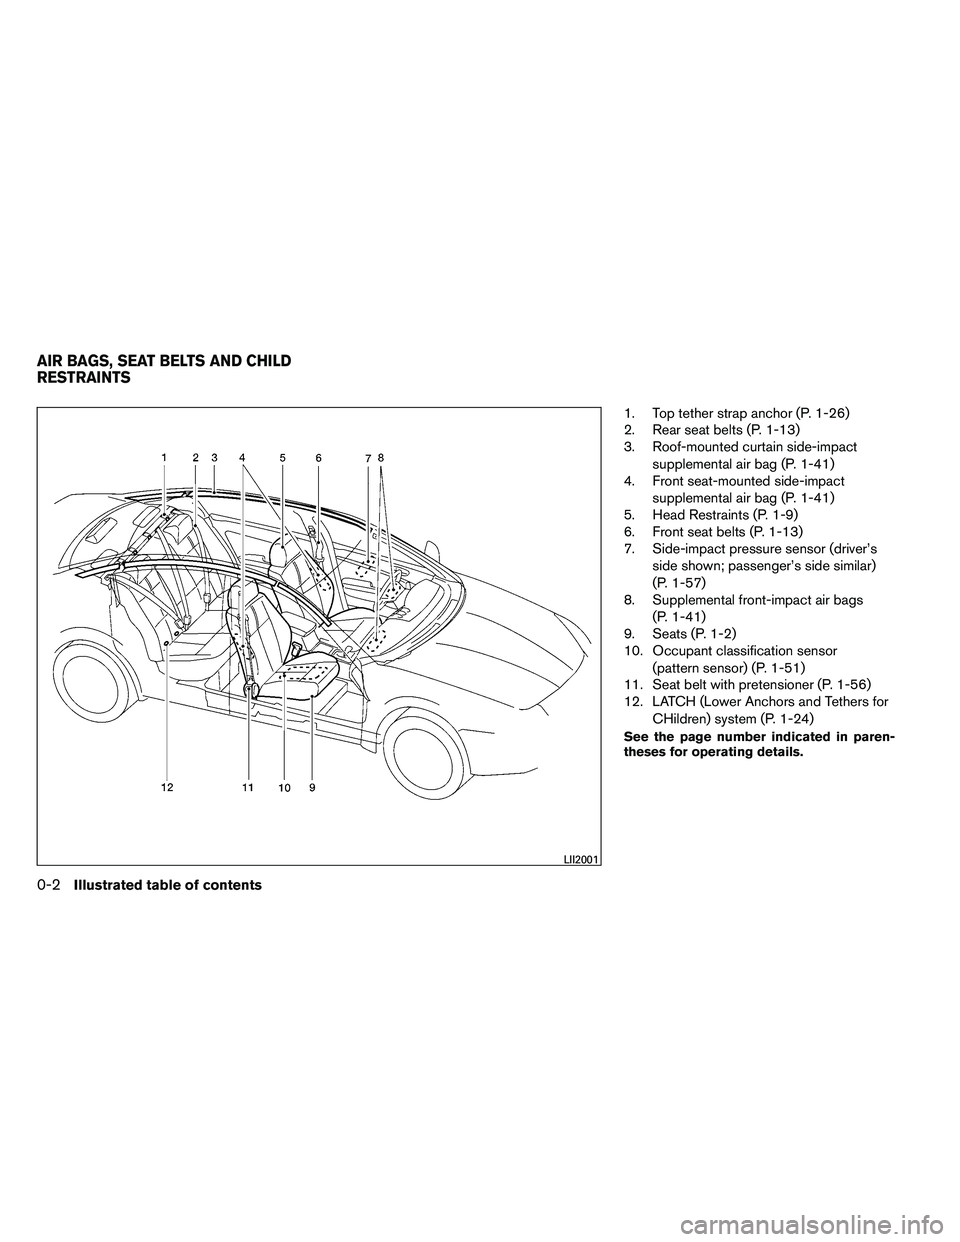 NISSAN ALTIMA 2012  Owners Manual 1. Top tether strap anchor (P. 1-26)
2. Rear seat belts (P. 1-13)
3. Roof-mounted curtain side-impactsupplemental air bag (P. 1-41)
4. Front seat-mounted side-impact
supplemental air bag (P. 1-41)
5. 